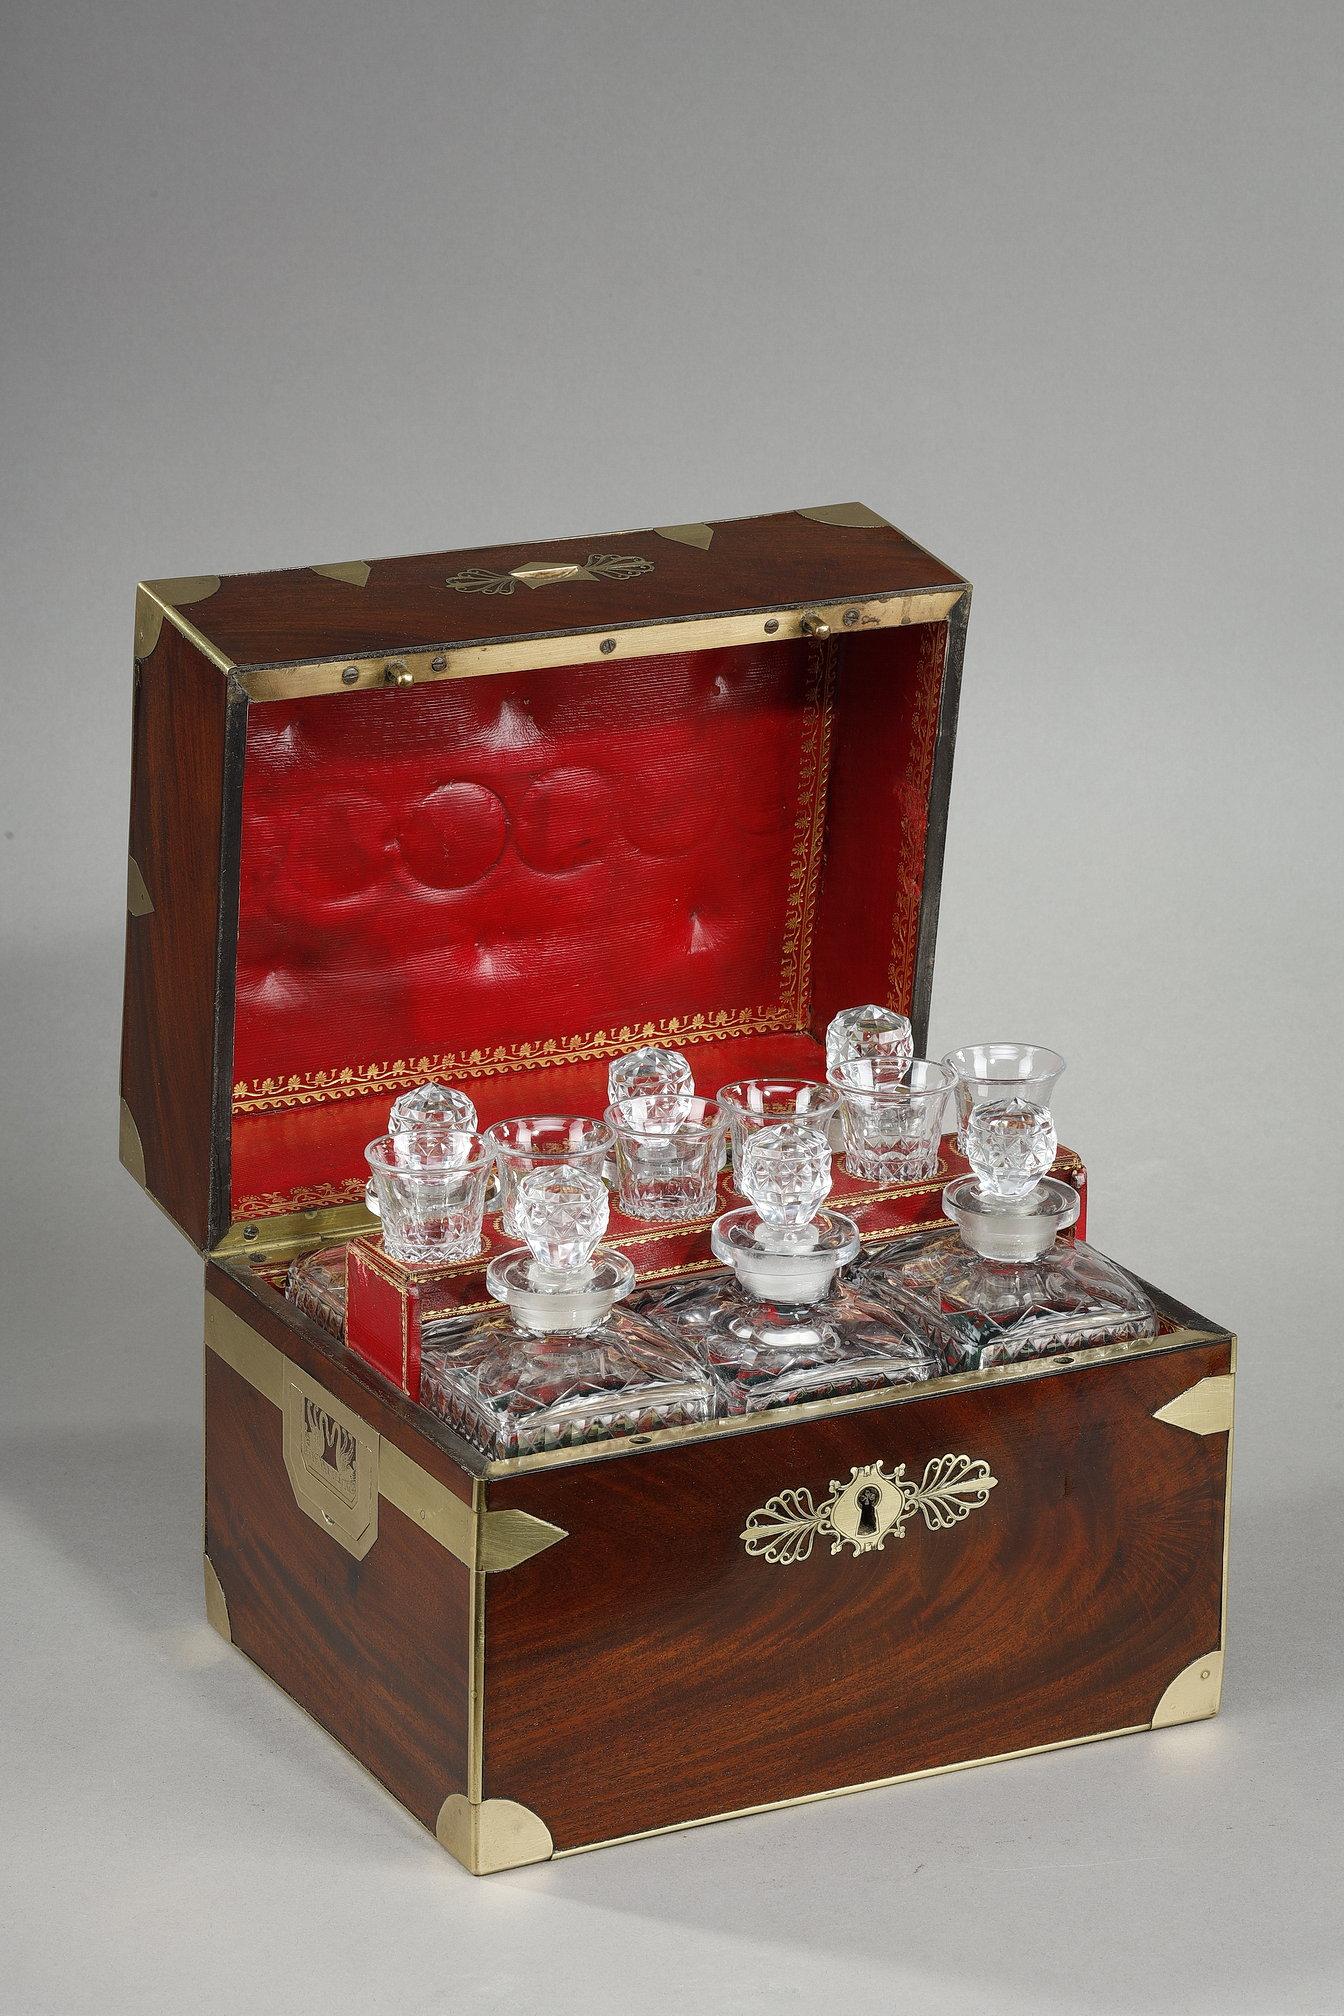 Flamed mahogany liqueur cellar with brass inlaid frame simulating box hardware. The side handles are also inlaid around a motif of two swans facing each other. The keyhole and opening handle are adorned with two palmettes. A monogrammed CG